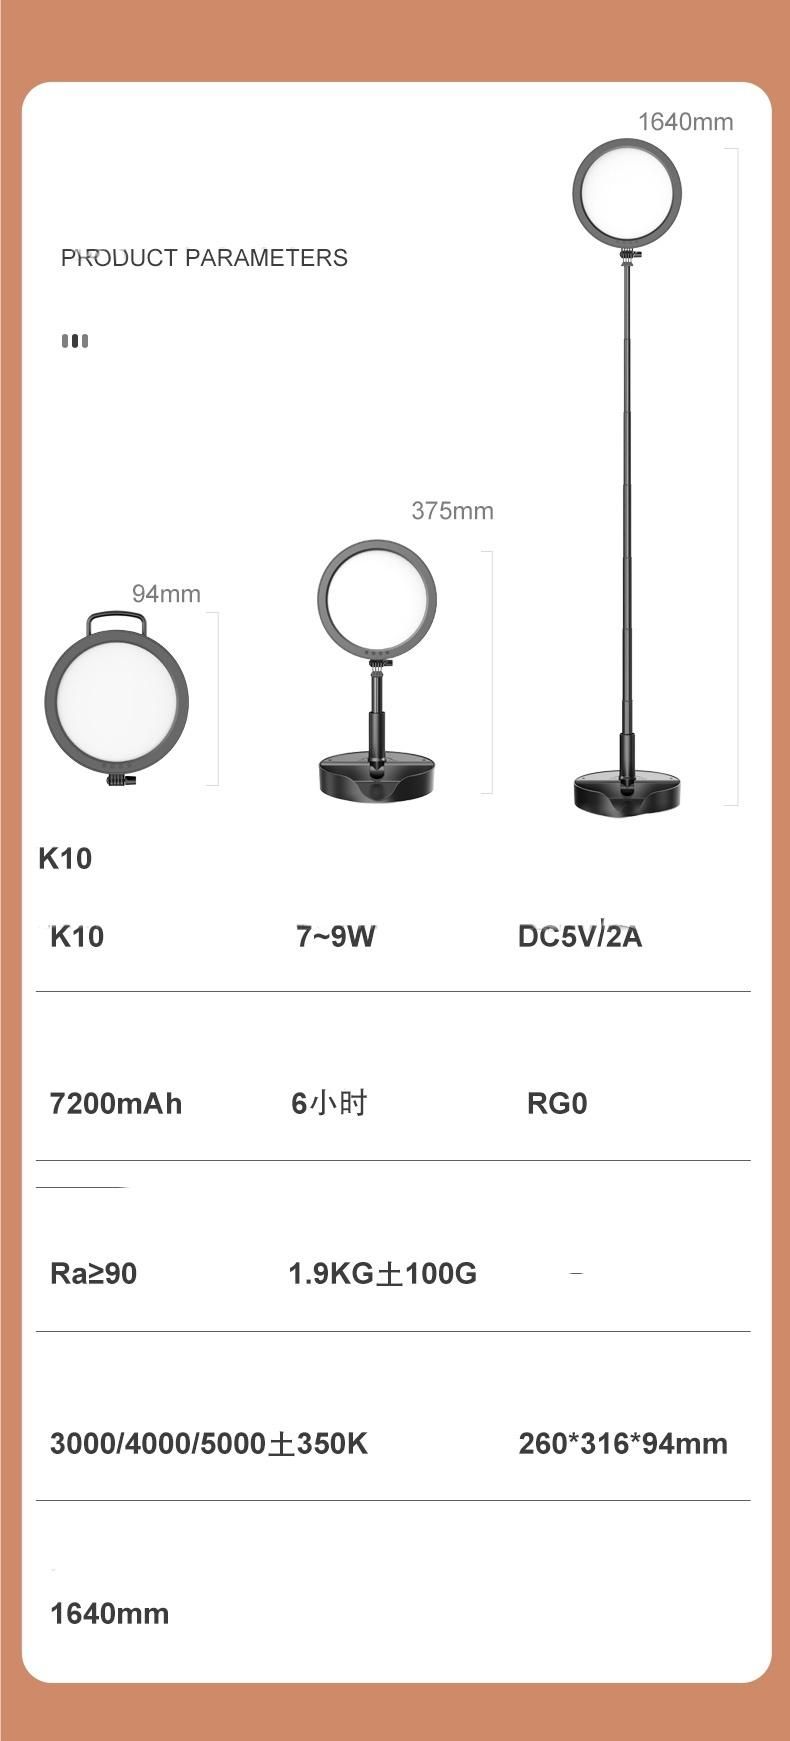 Factory LED Desk Lamp, Foldable and Height Adjustable Table Lamps, Dimmable Office Lamp, Adjustable Color Modes Brightness, Eye Protection Light